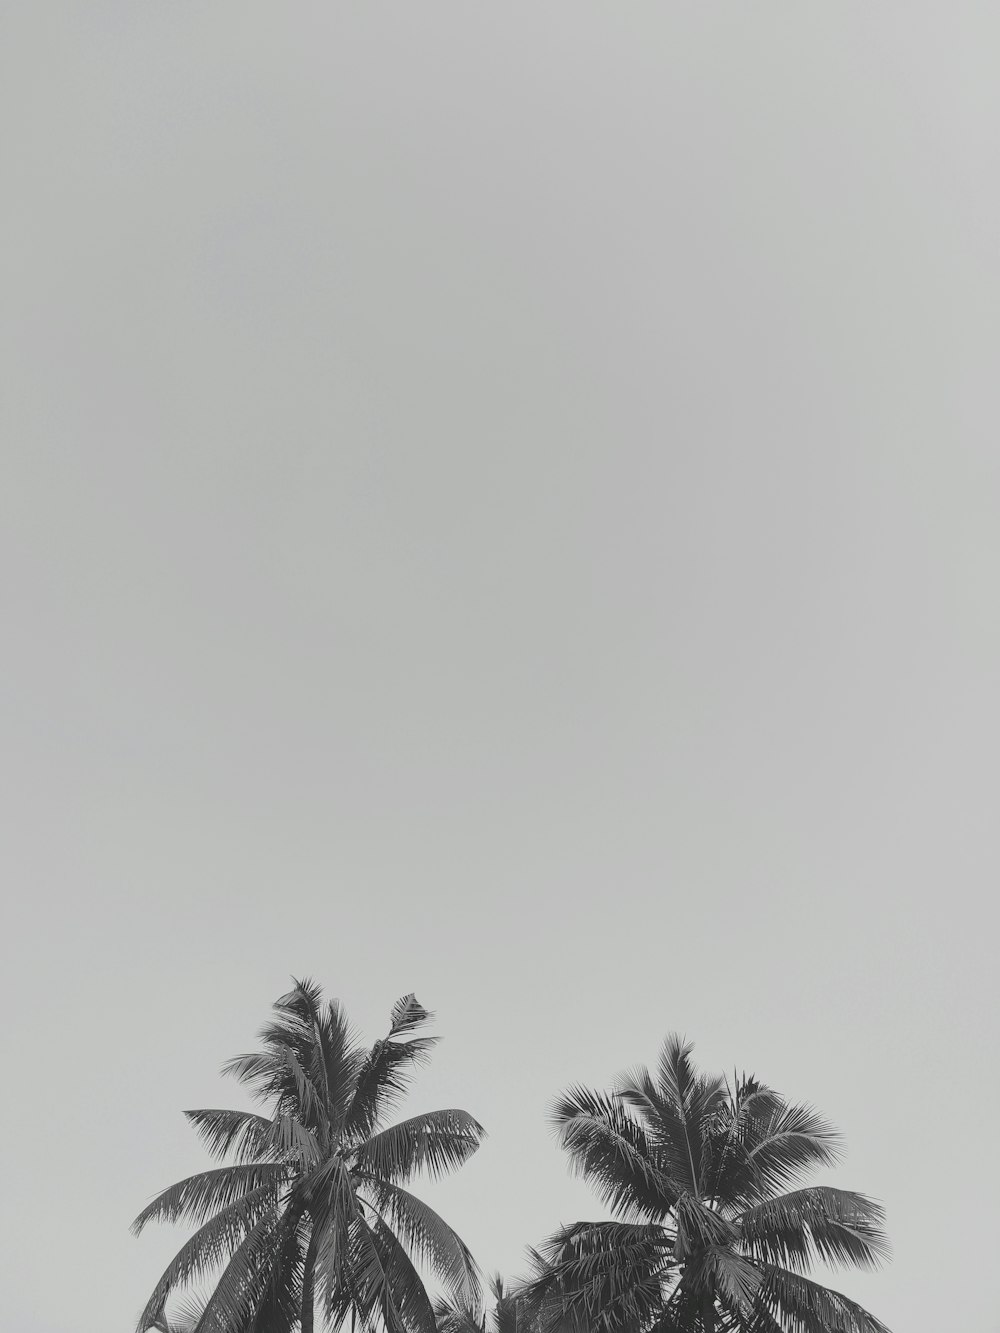 a black and white photo of palm trees